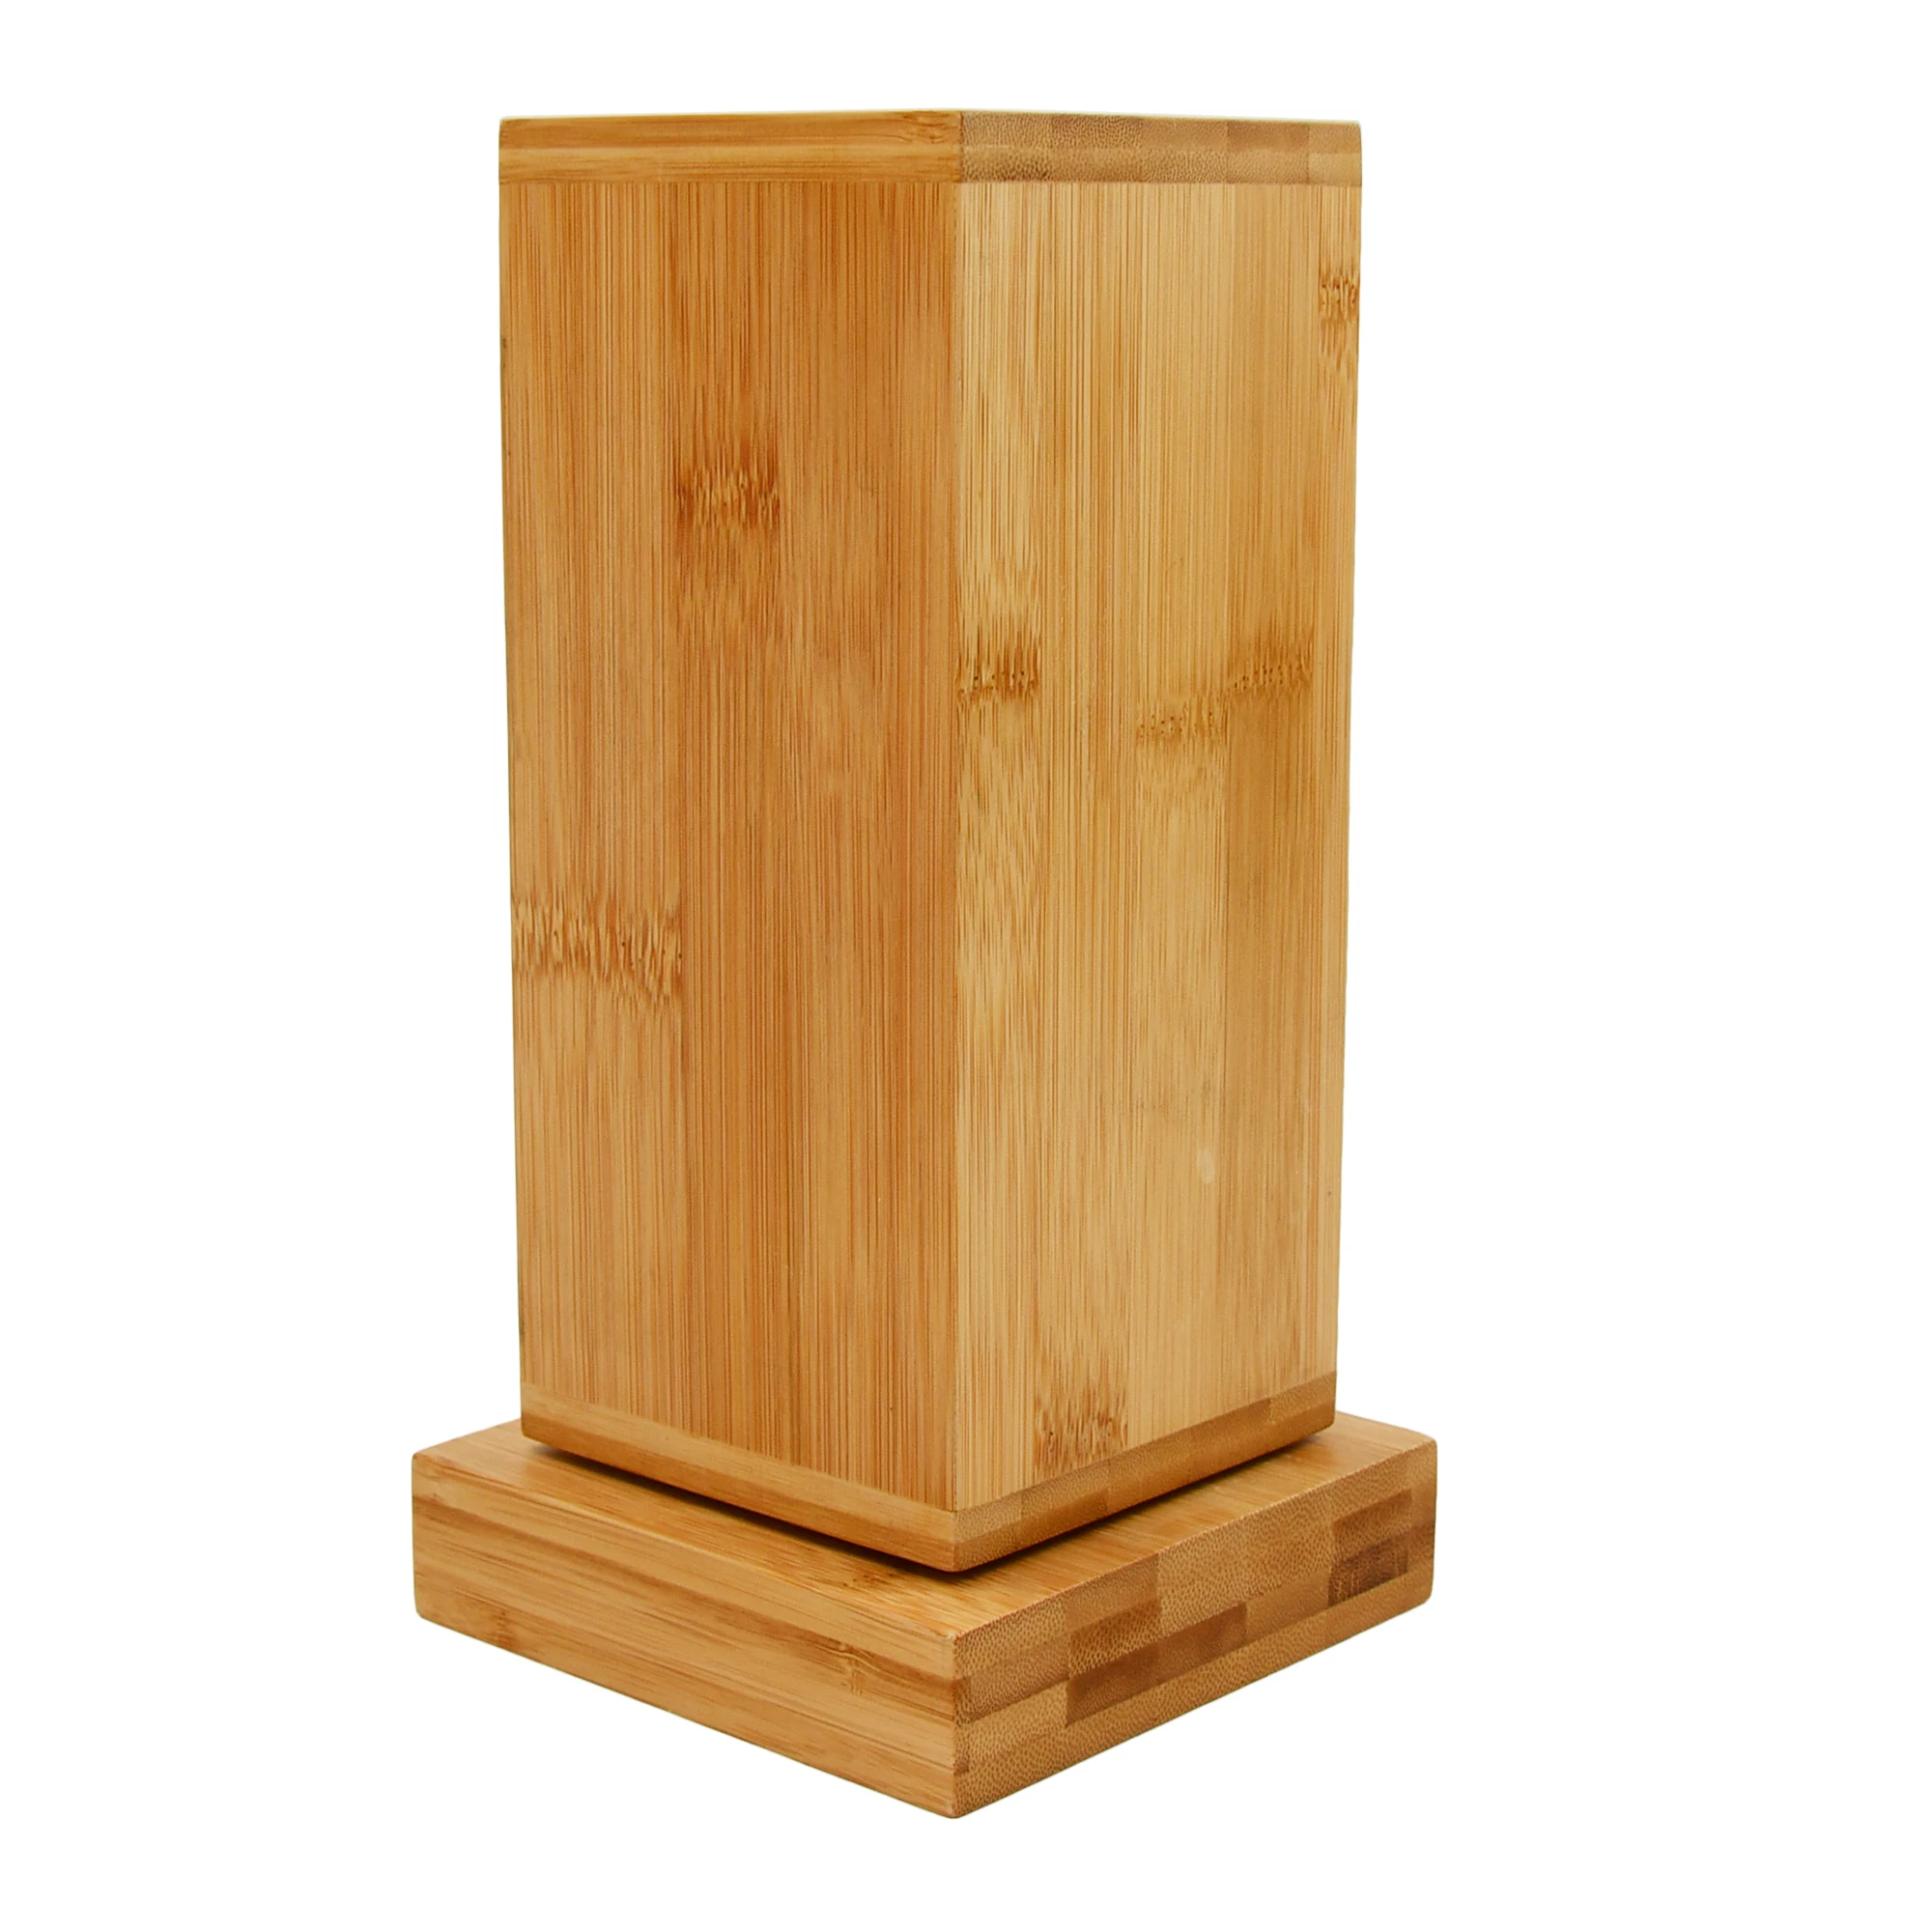 Wholesale Bamboo Knife Holder Large Capacity Kitchen Household Multi Function Knife Storage And Placement Rack